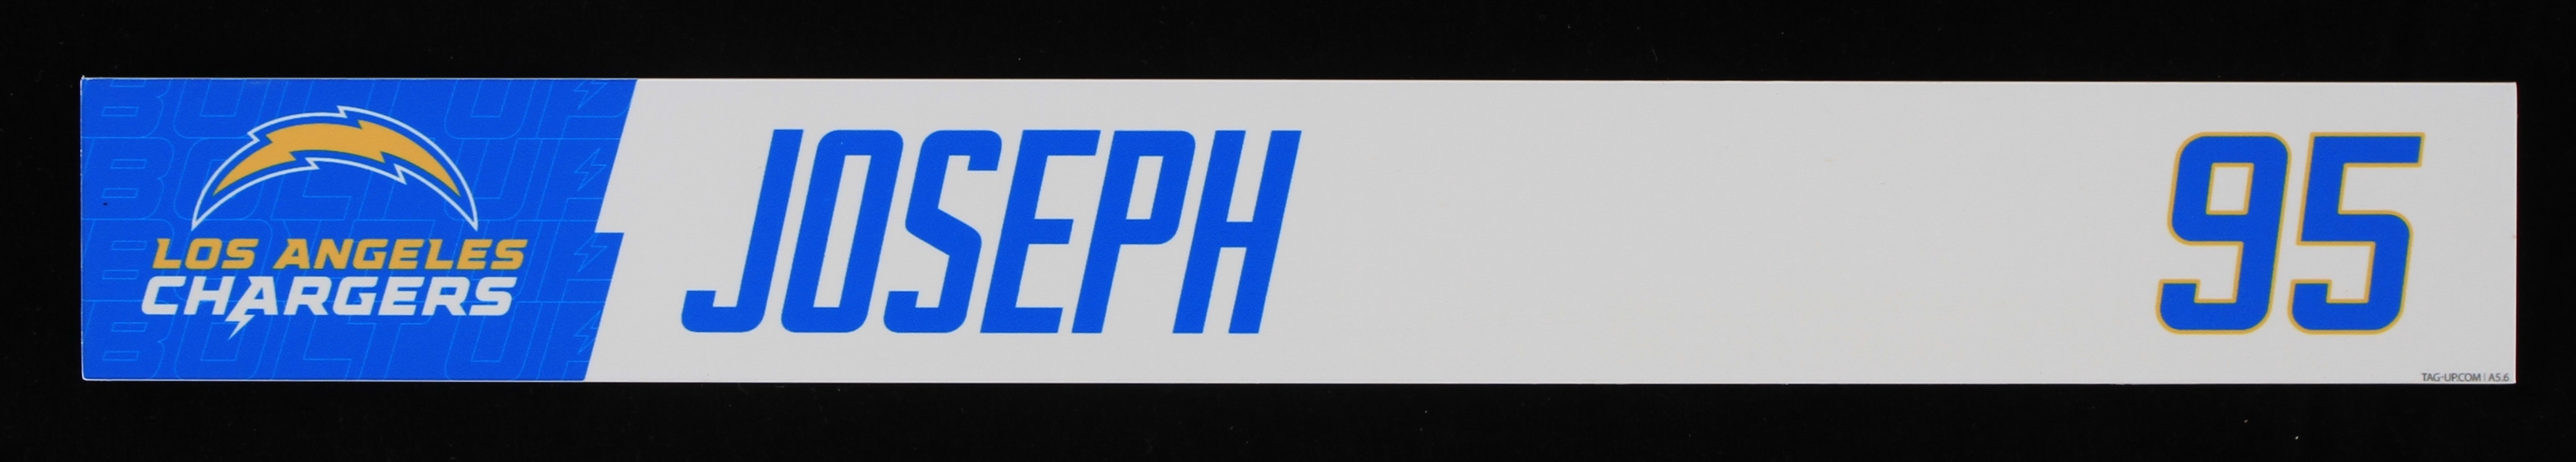 2020 Linval Joseph Los Angeles Chargers Locker Name Plate